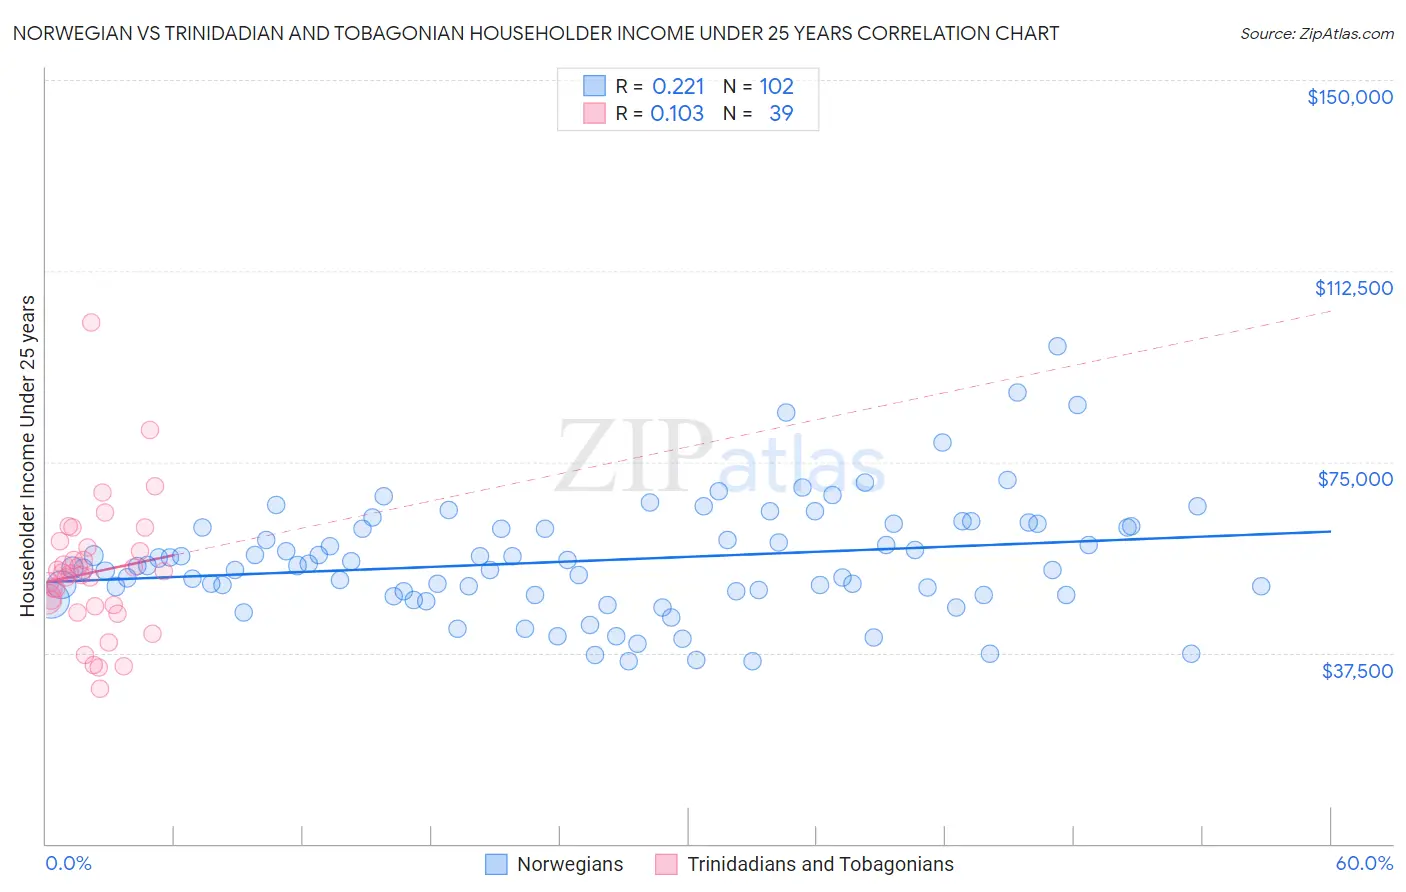 Norwegian vs Trinidadian and Tobagonian Householder Income Under 25 years